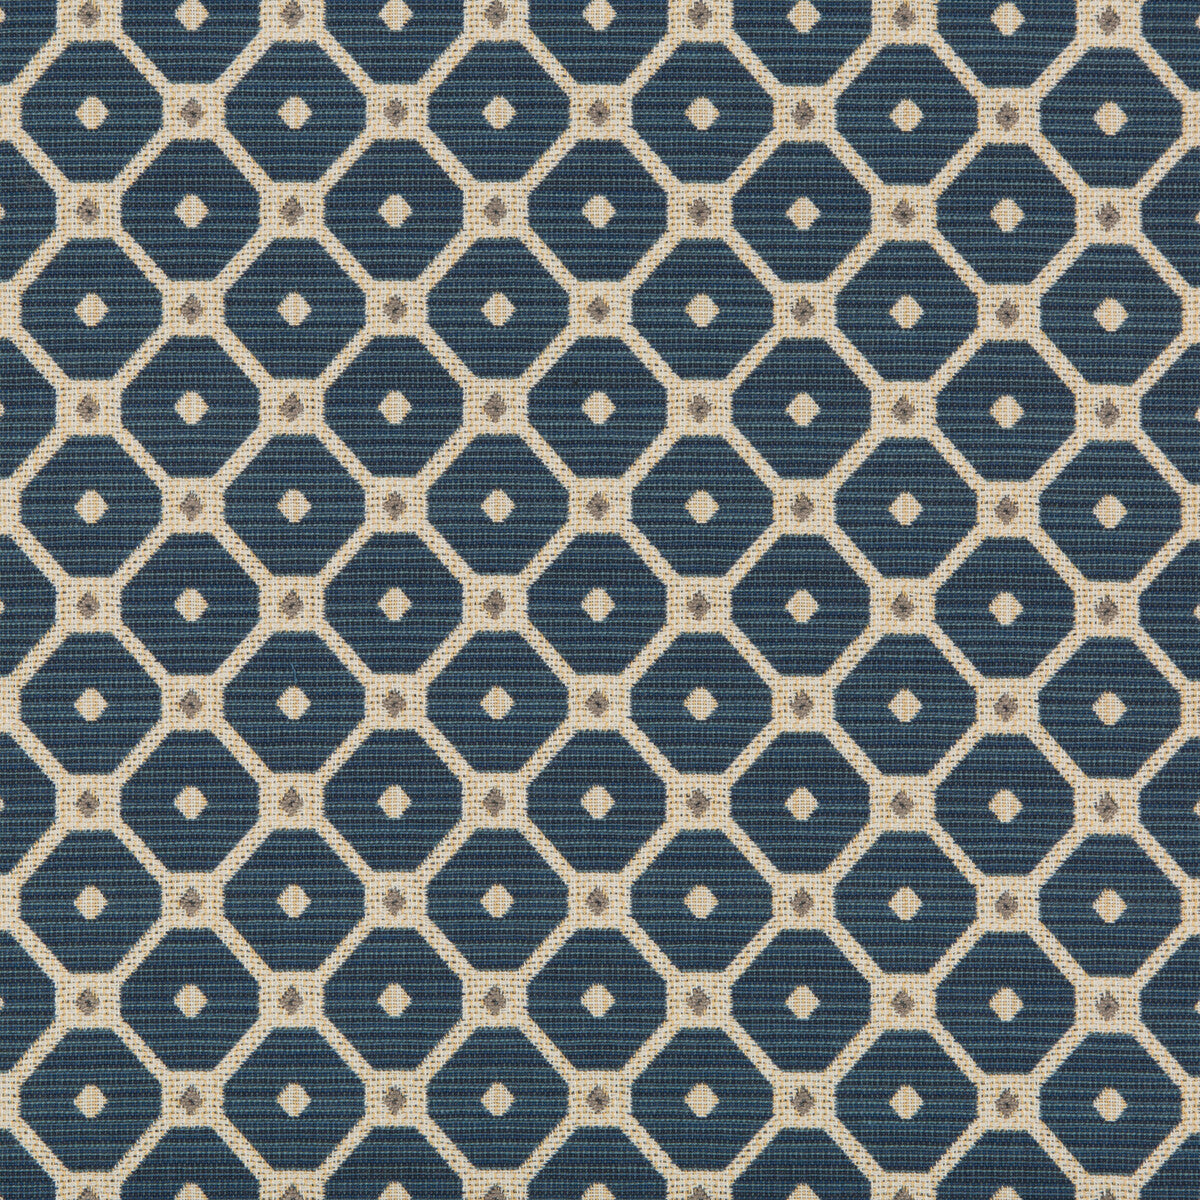 Kravet Design fabric in 35011-5 color - pattern 35011.5.0 - by Kravet Design in the Performance Crypton Home collection